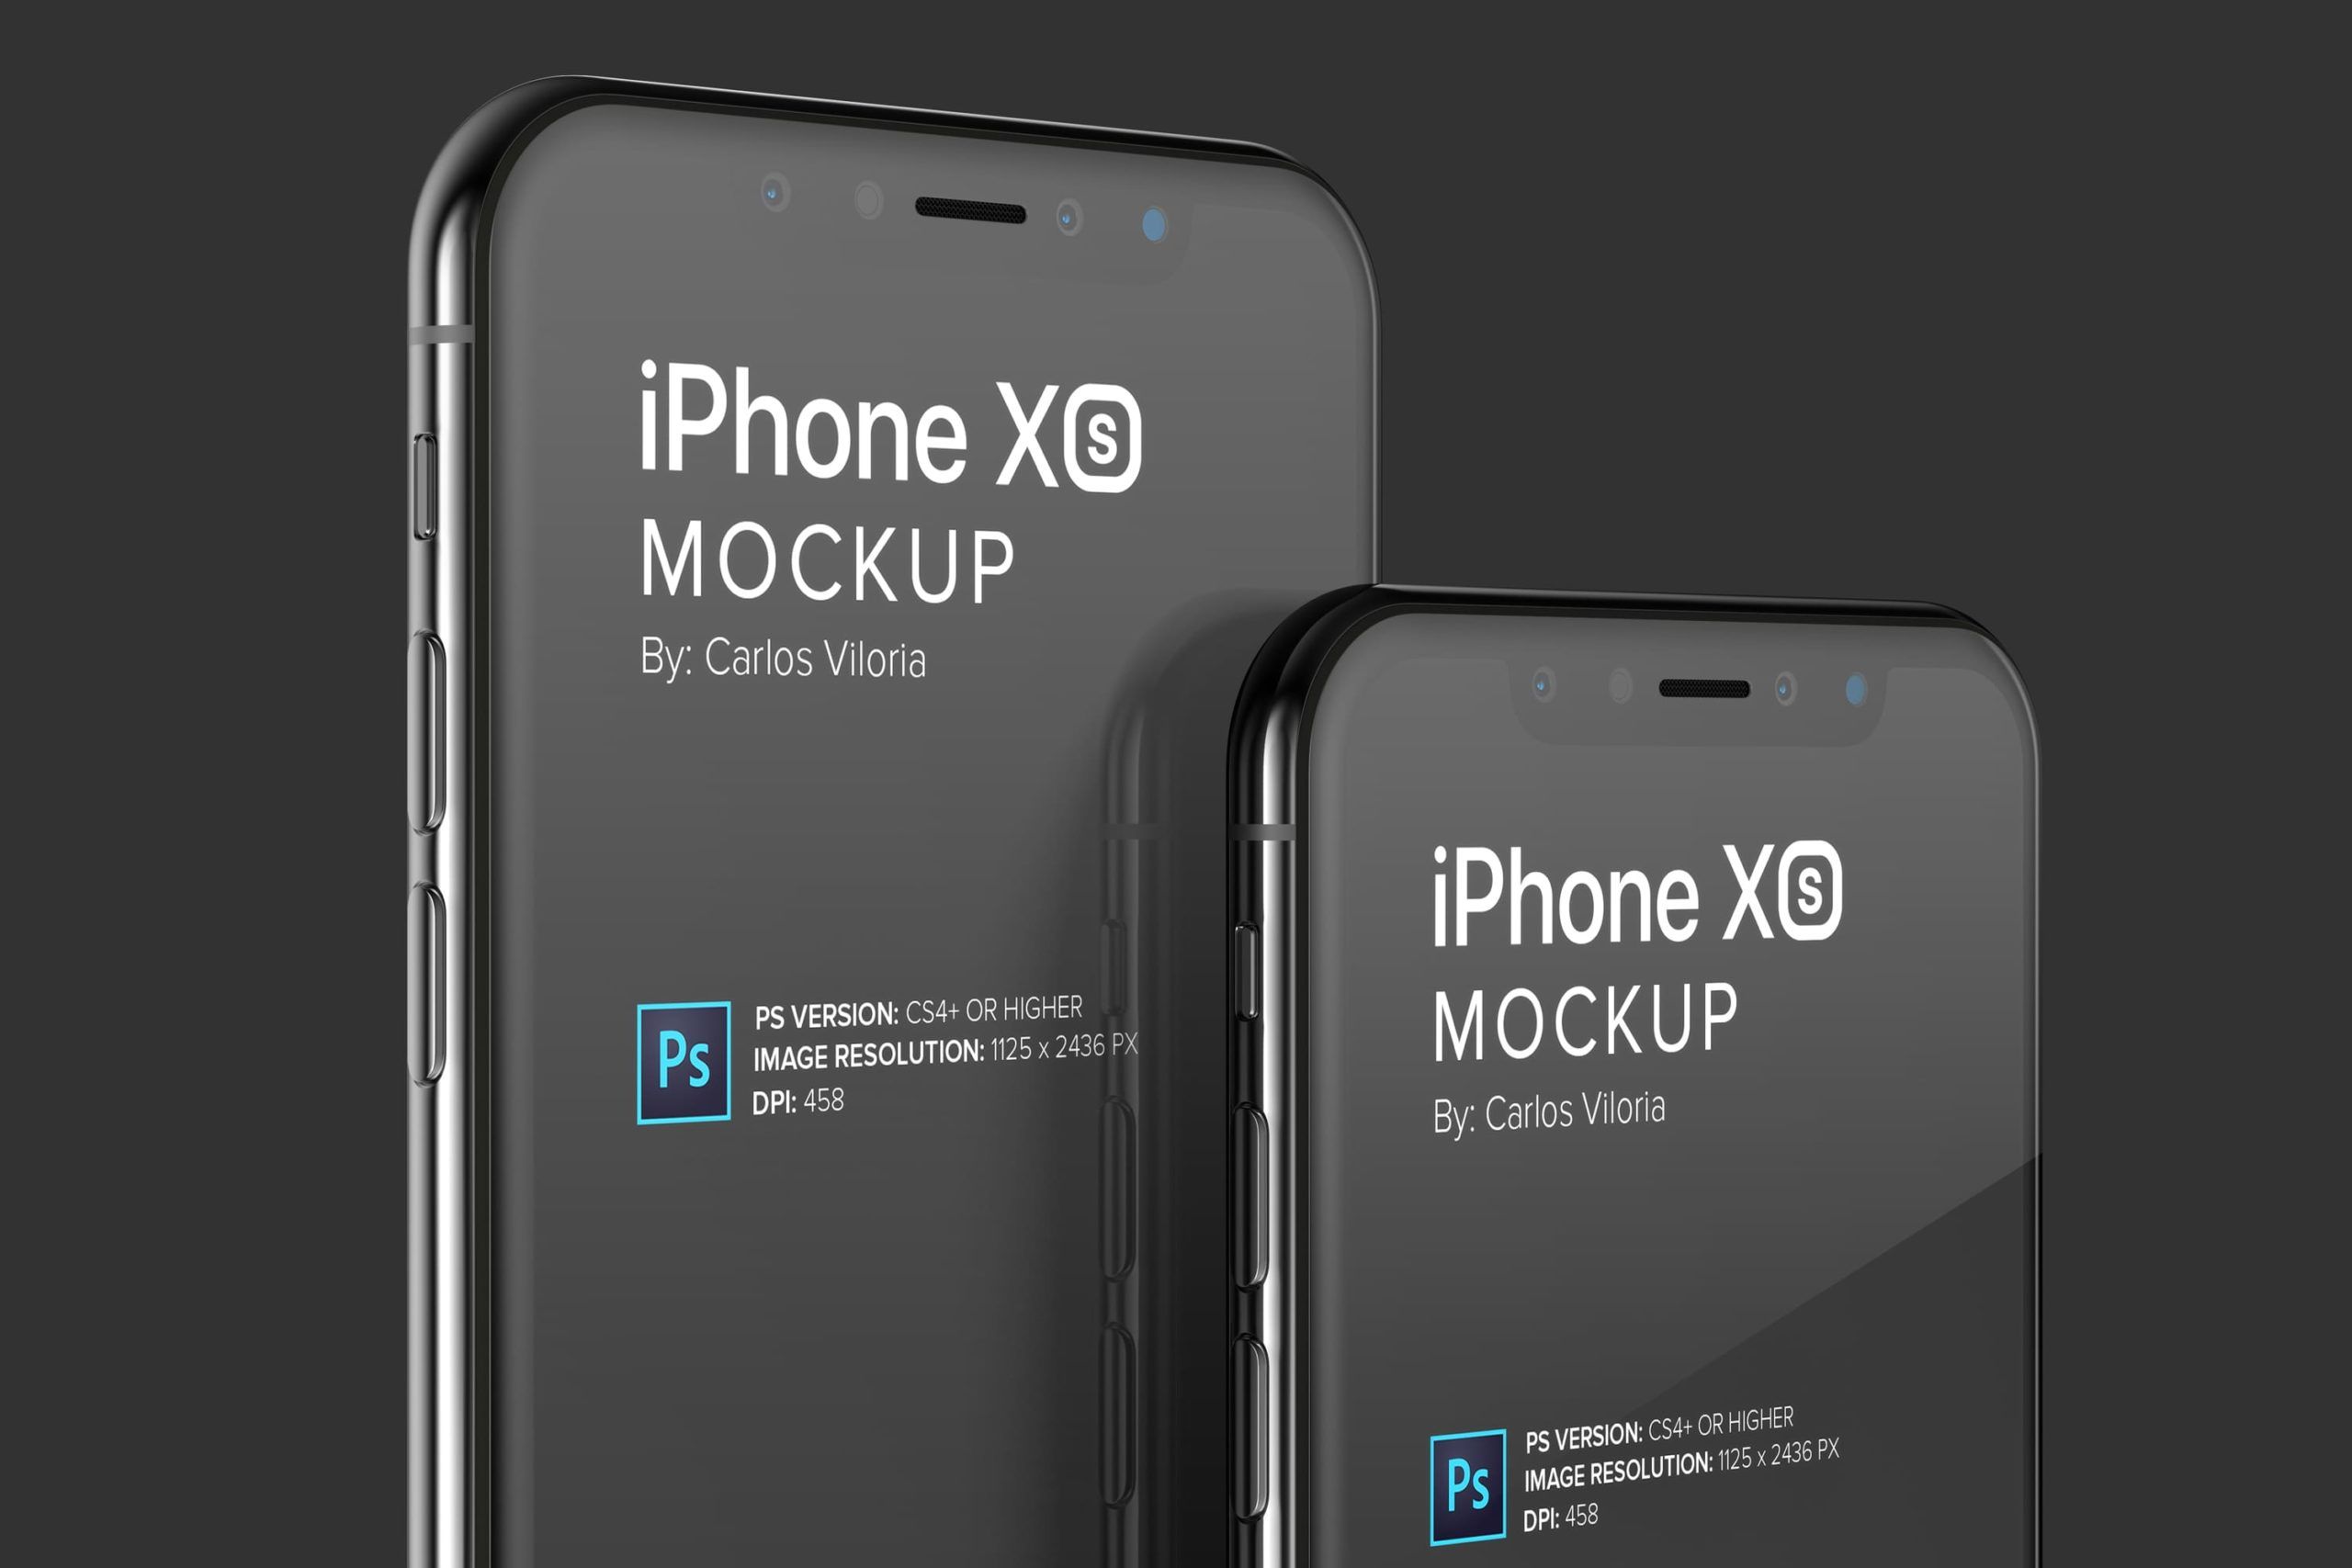 Iphone Xs Mockup for Close Up Views